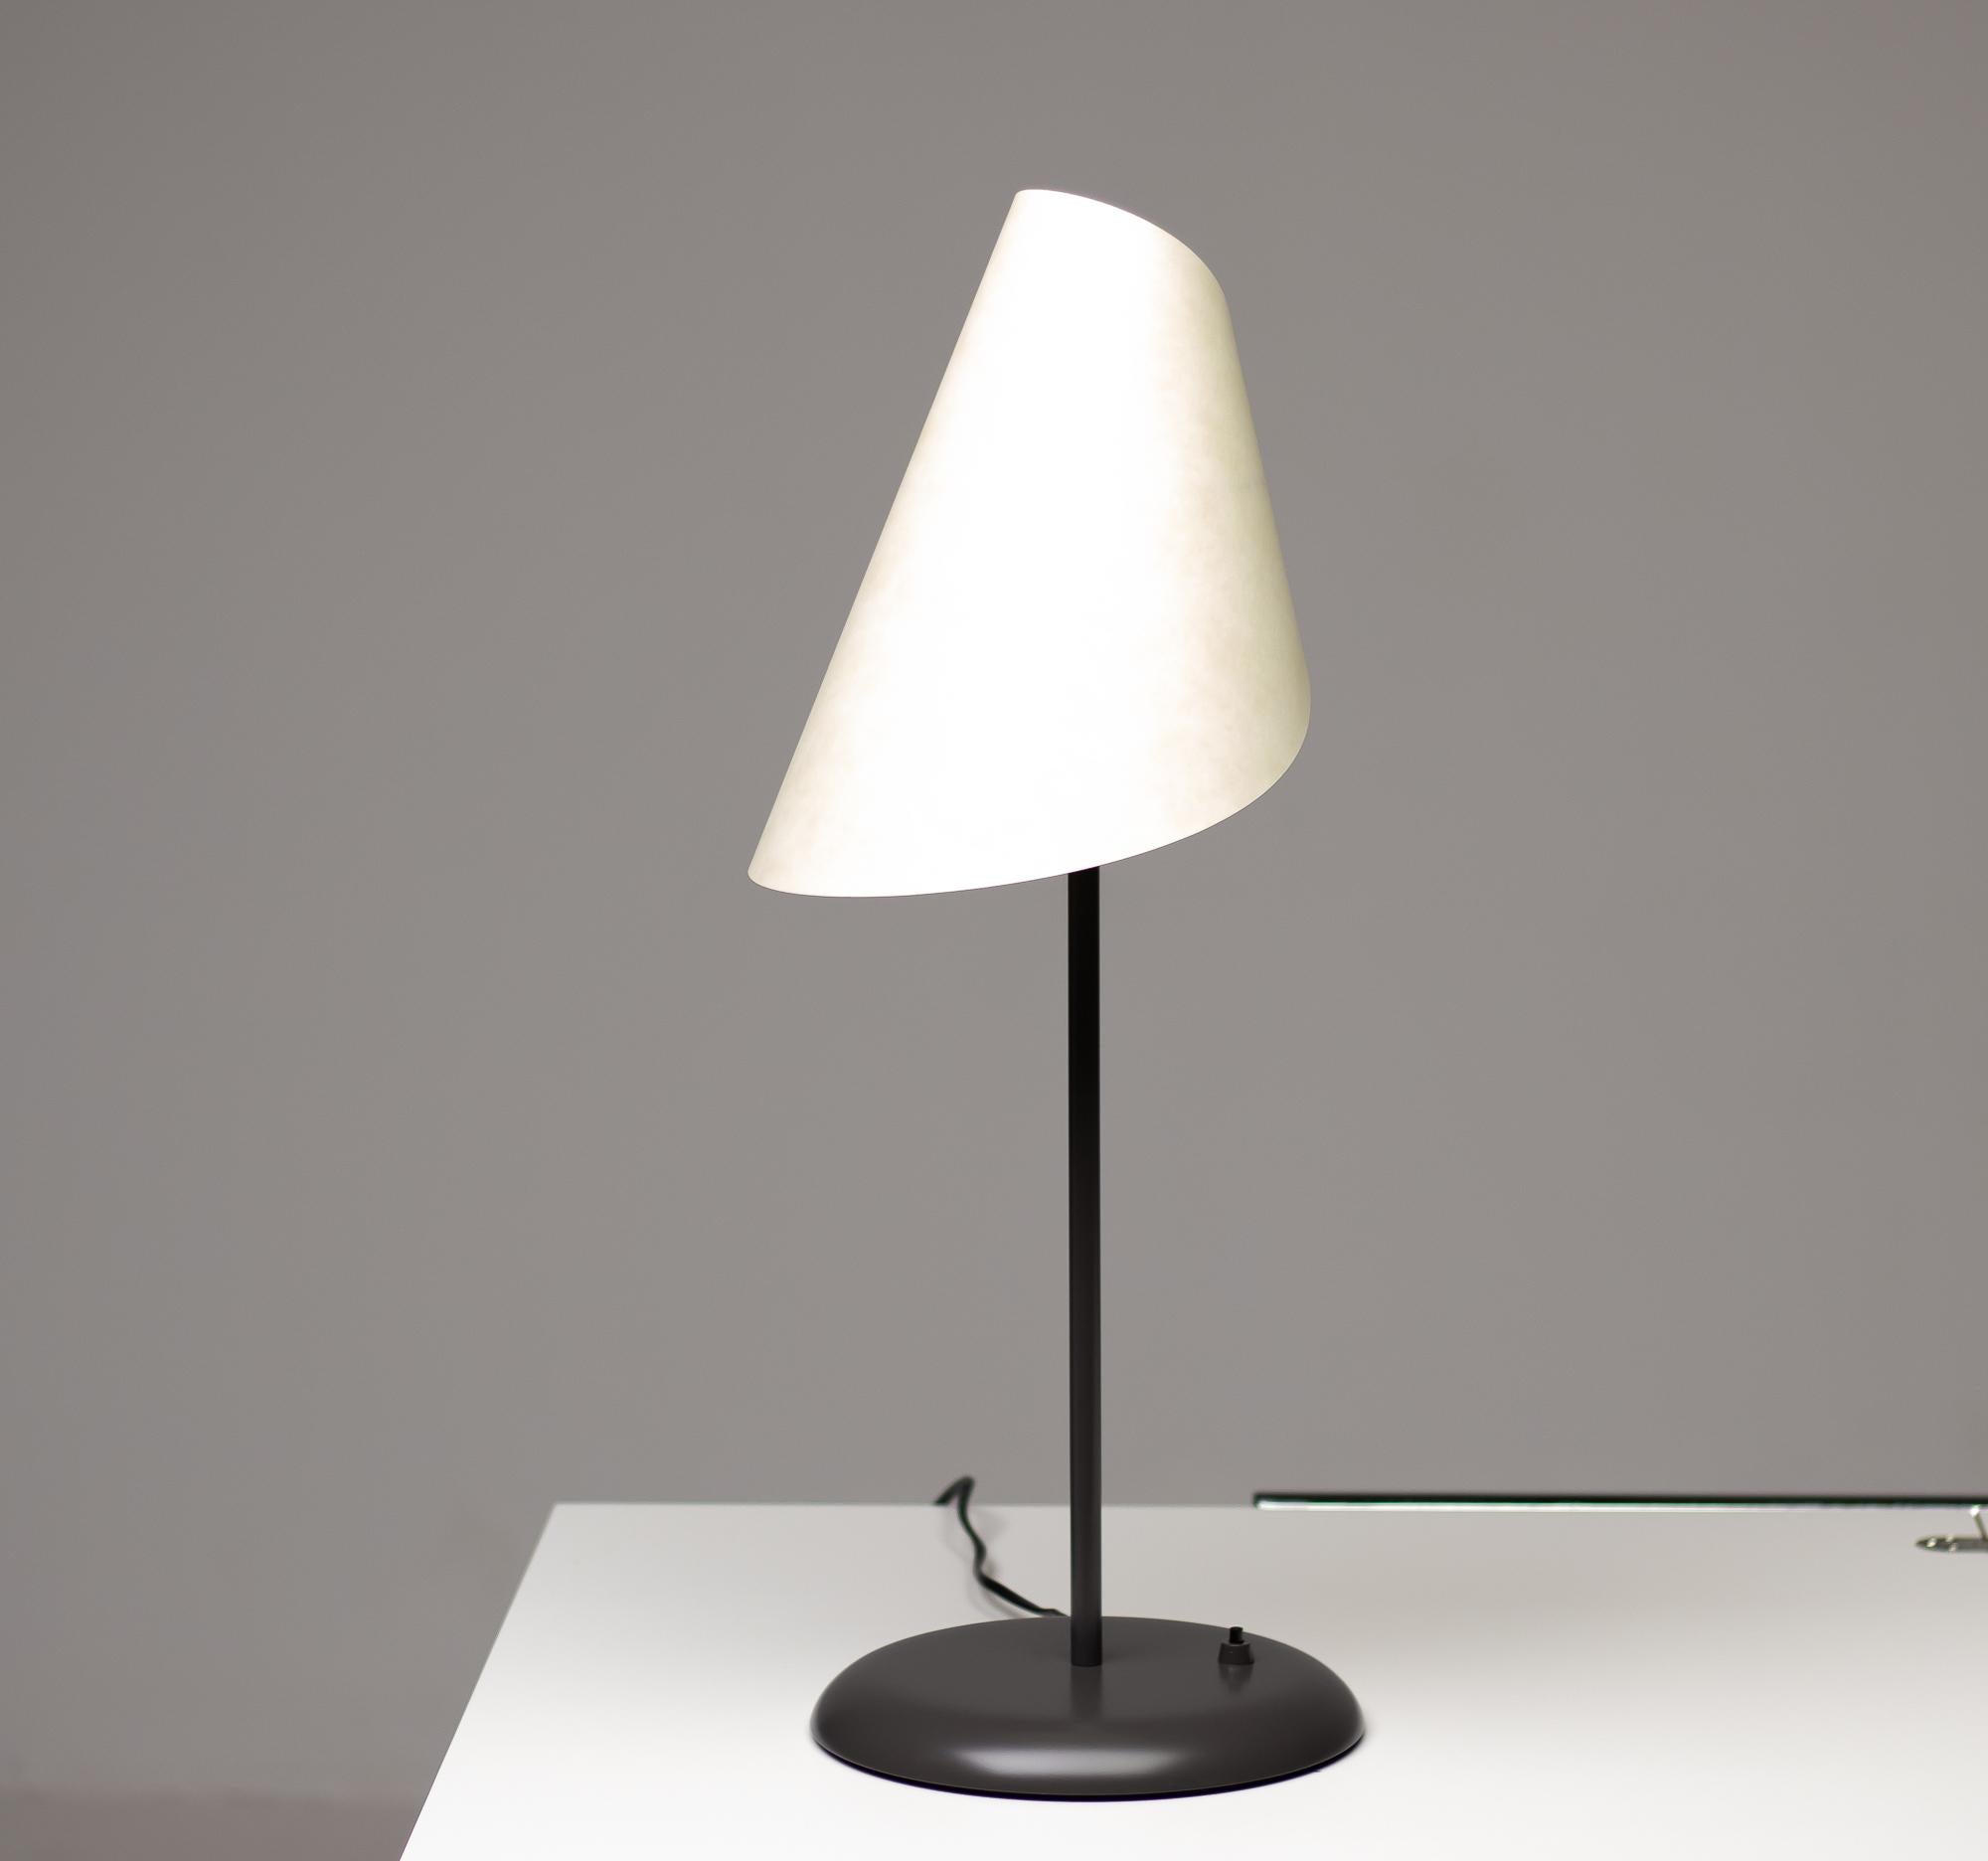 Elegant and rare table lamp made by Nemo Cassina.
Steel frame in grey, lampshade in white composite material.
Italy, 1973.
Marked with label.
4 available, priced individually.

References: 
Domus n. 754-755, 1993, p. 133; Domus n. 671, April